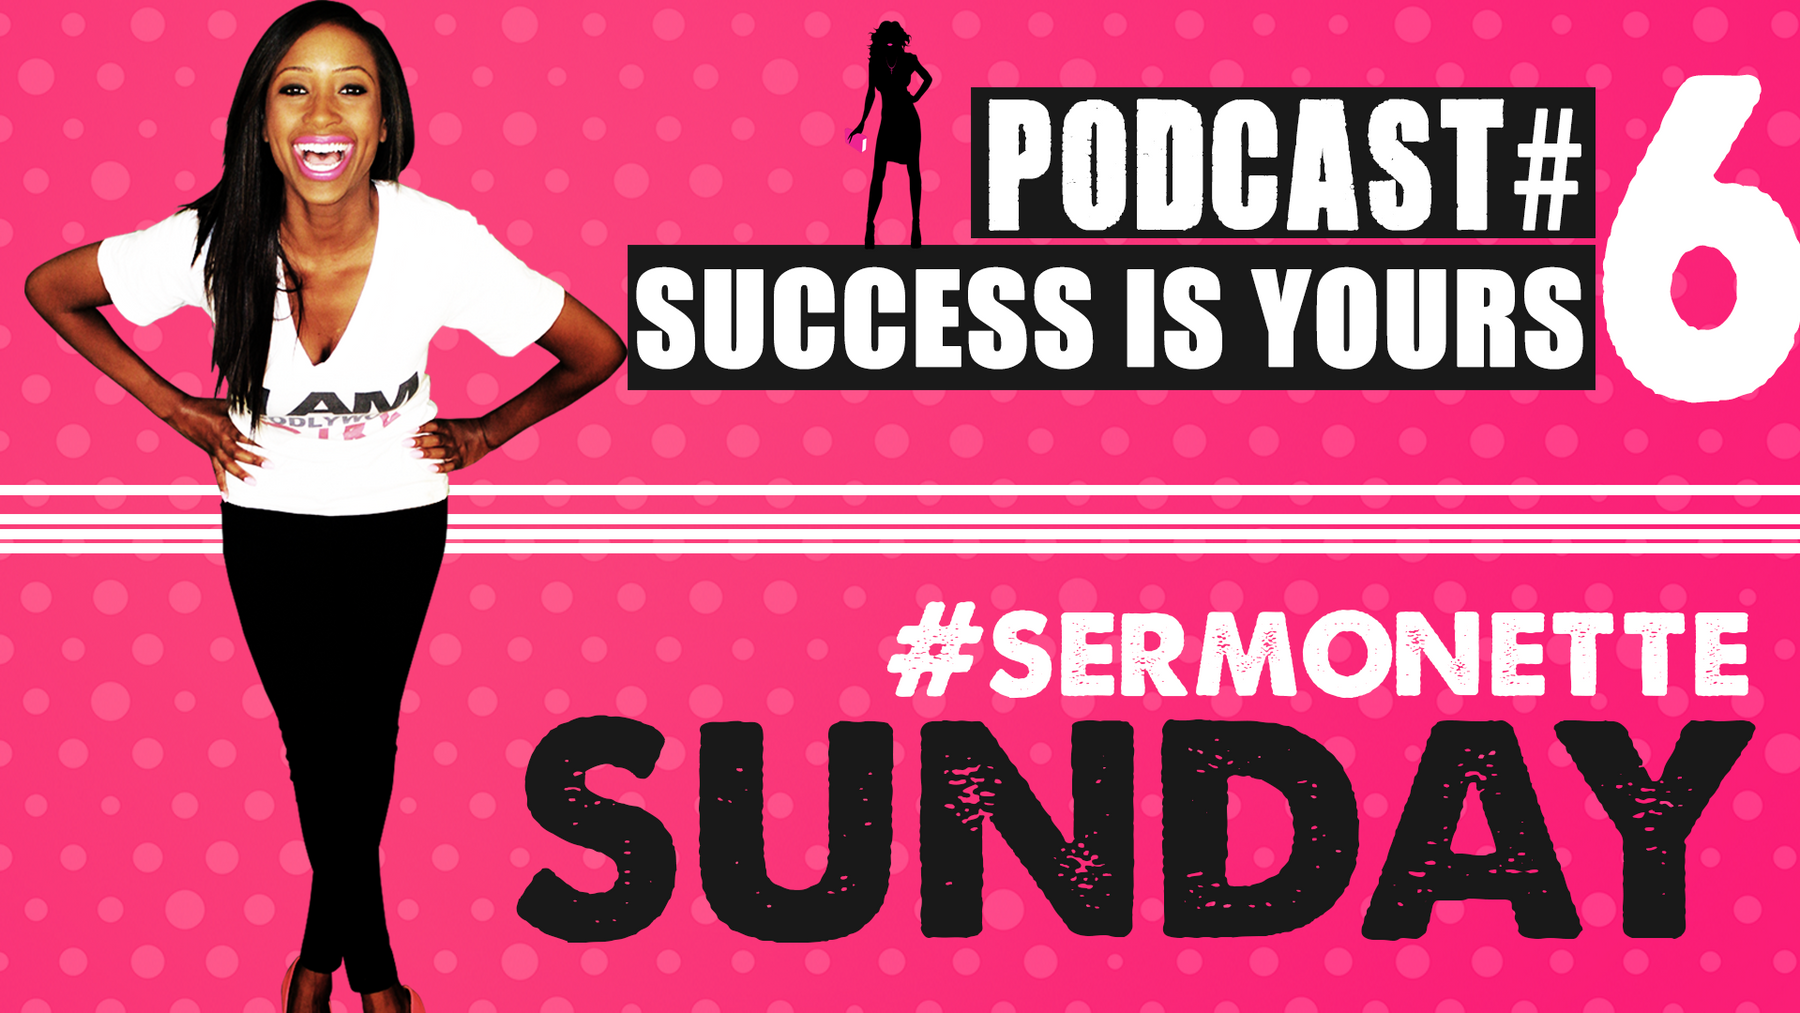 Sermonette Sunday - Success is Yours!